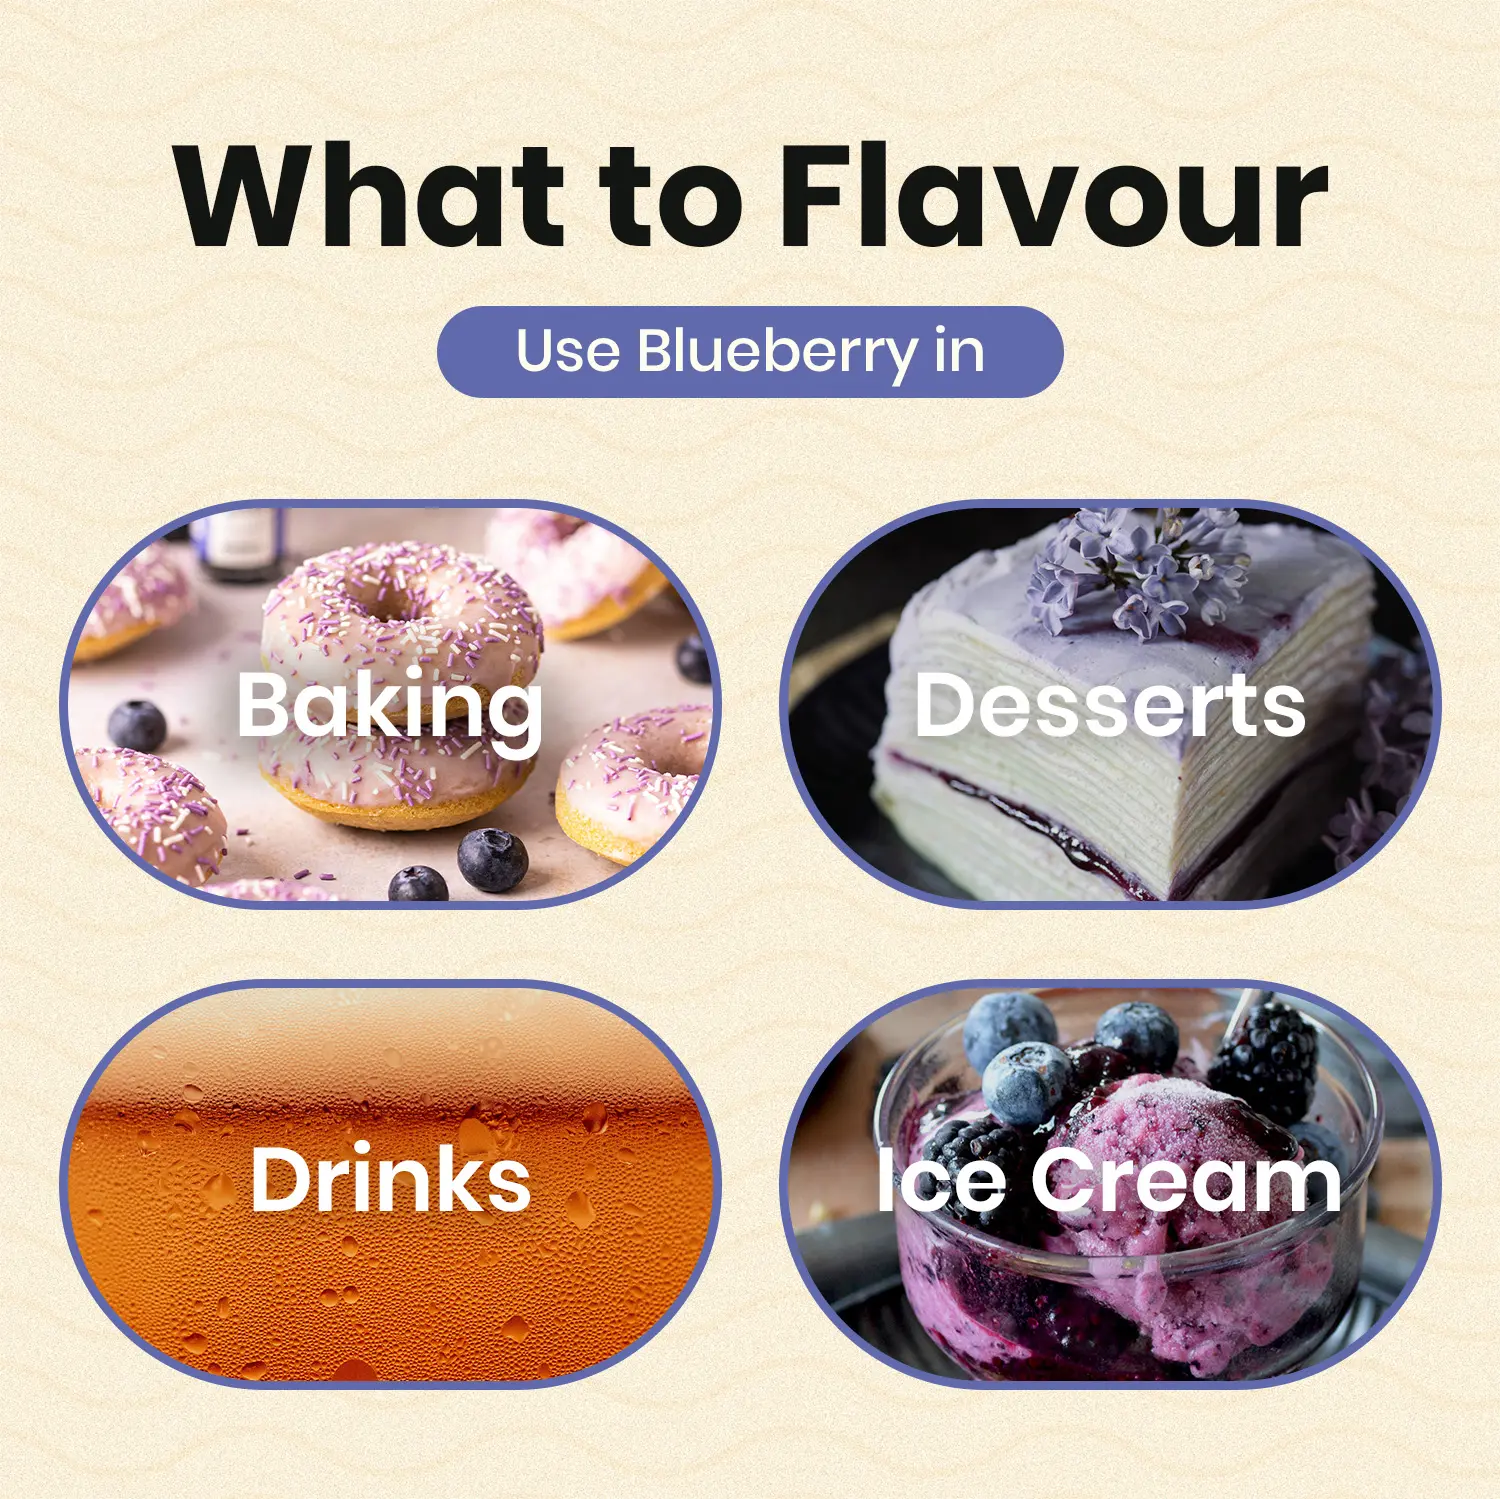 Blueberry Natural Flavouring - what to flavour